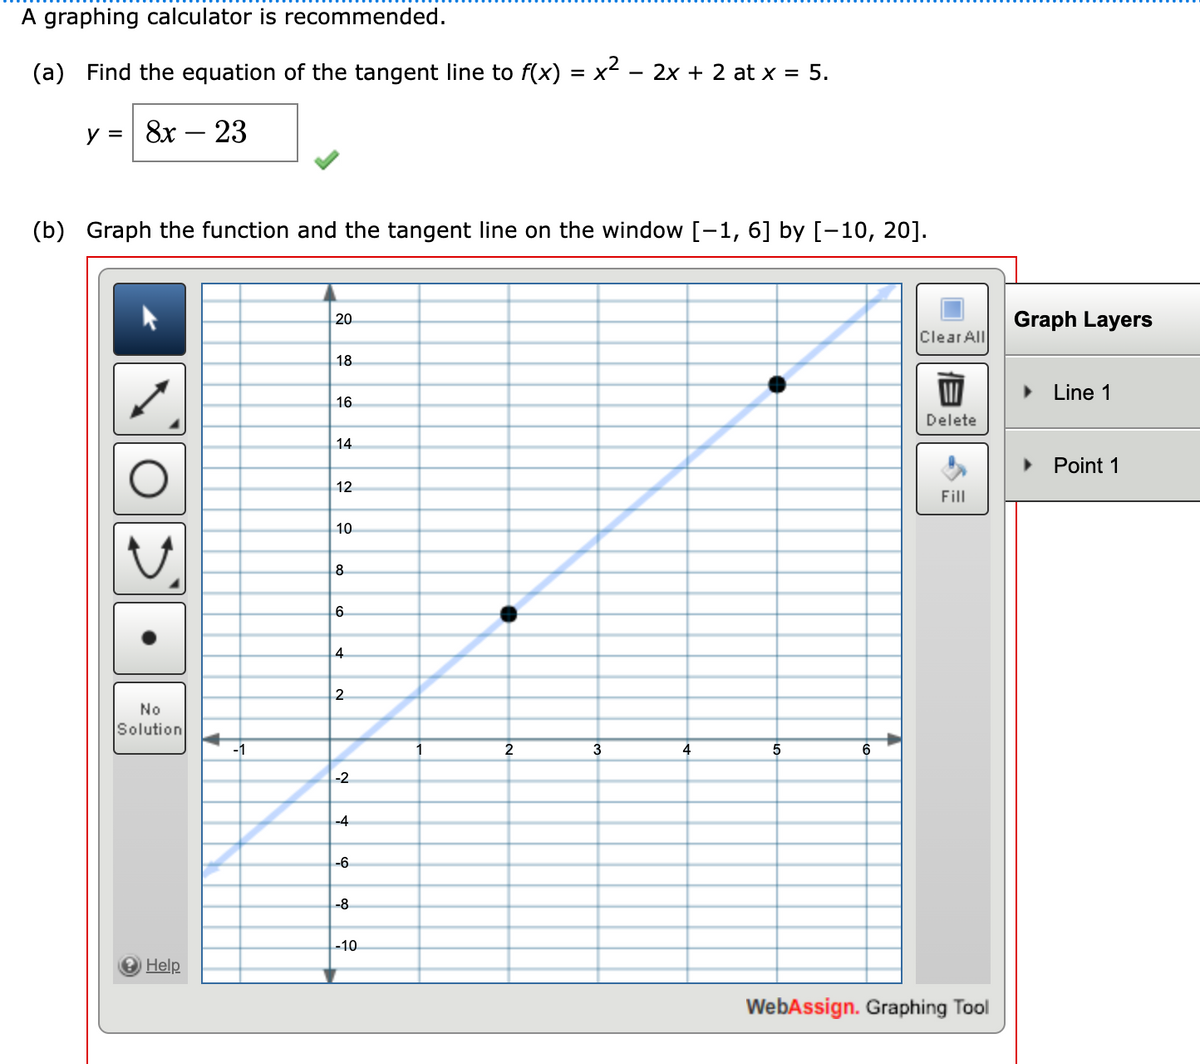 A graphing calculator is recommended.
(a) Find the equation of the tangent line to f(x) = x² − 2x + 2 at x = 5.
y = 8x - 23
(b) Graph the function and the tangent line on the window [-1, 6] by [-10, 20].
20
Clear All
18
16
Delete
14
12
Fill
10
4
No
Solution
→ Help
-1
8
6
4
2
-2
-4
-6
-8
-10
1
2
3
5
6
WebAssign. Graphing Tool
Graph Layers
► Line 1
Point 1